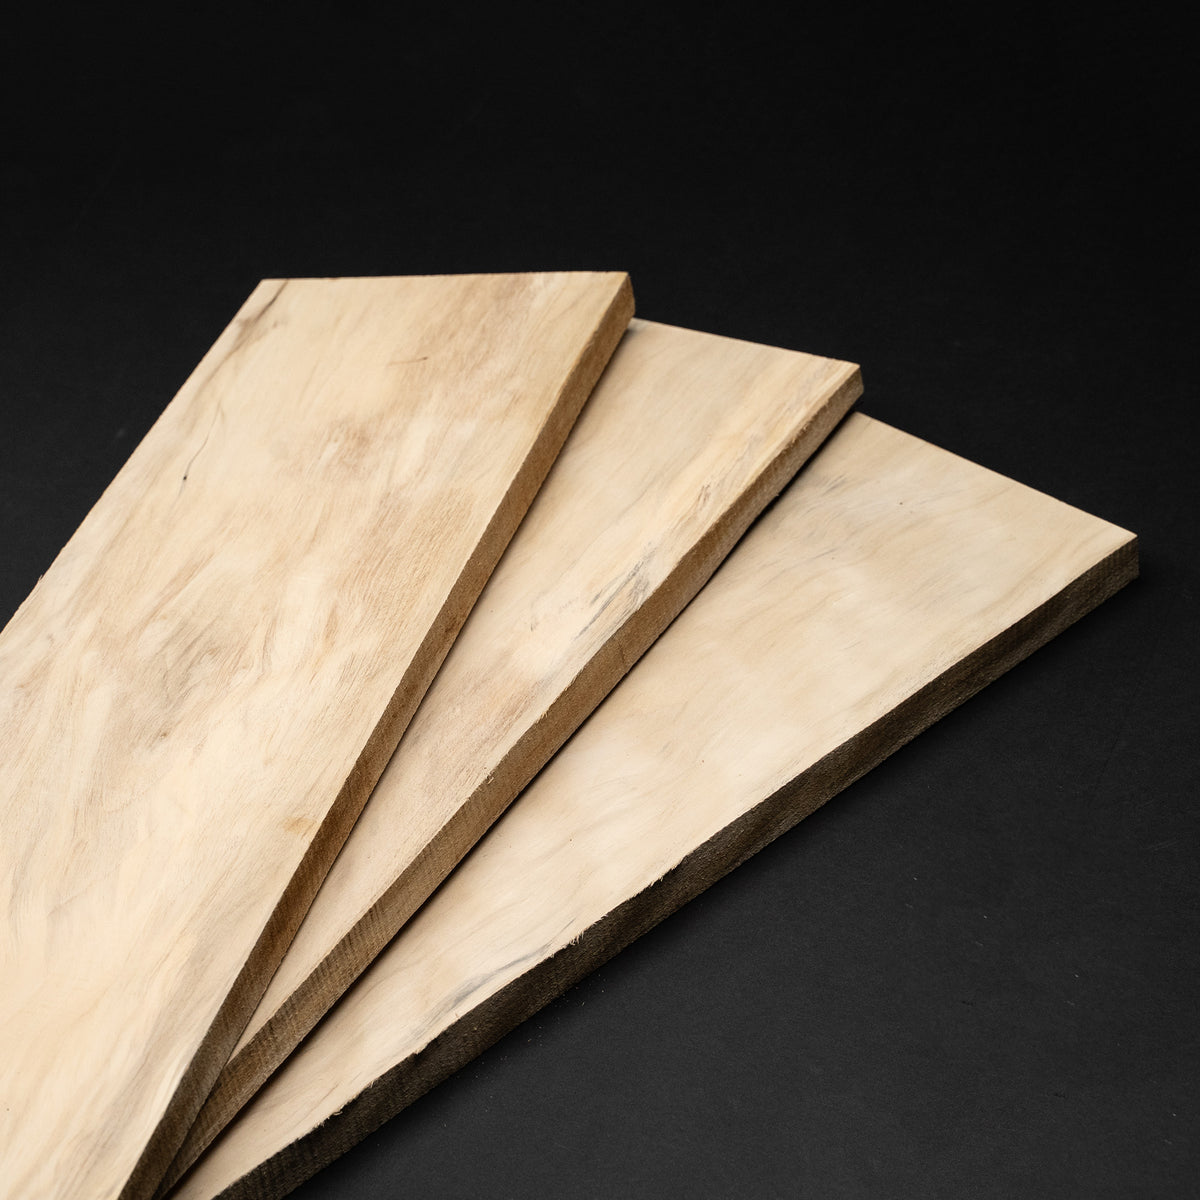 4/4 1” Soft Red Maple Boards - Kiln Dried Dimensional Lumber - Cut to Size Soft Maple Board